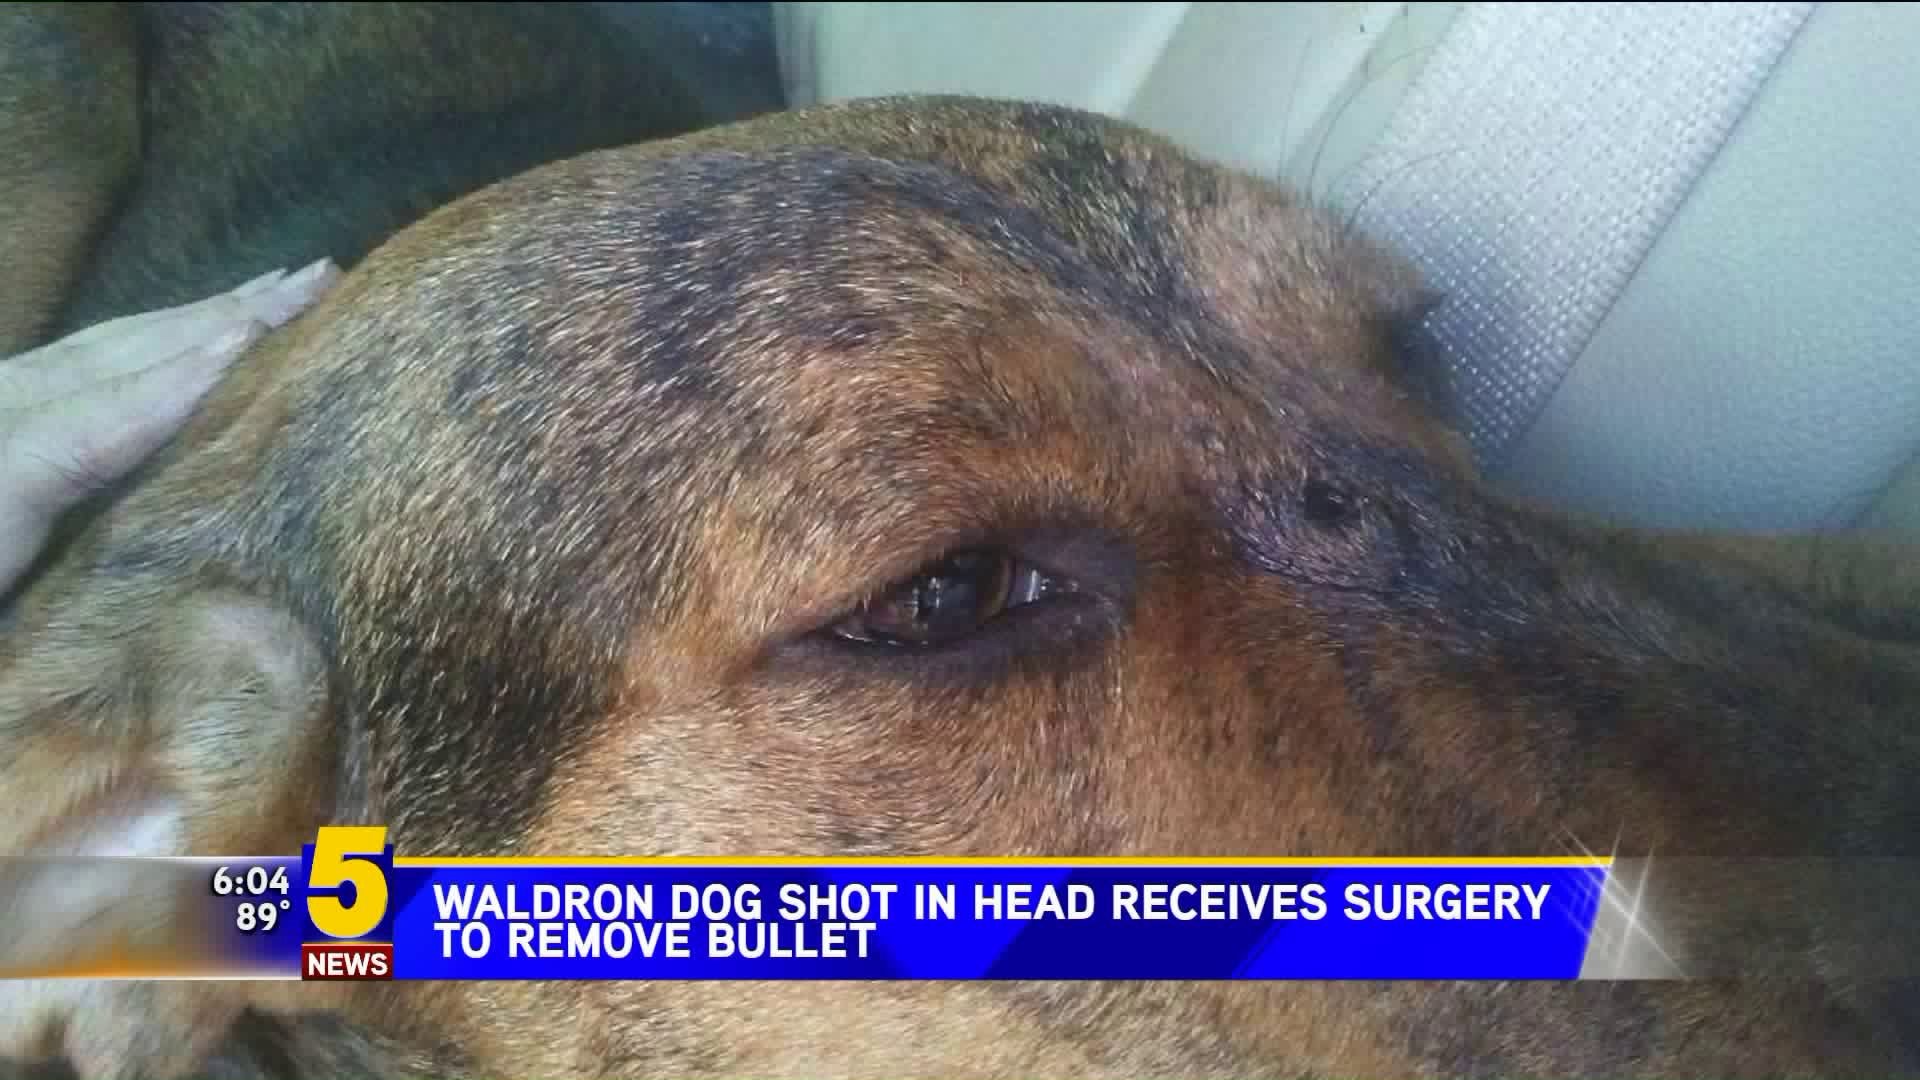 Dog In Waldron Has Surgery To Remove Bullet From Head